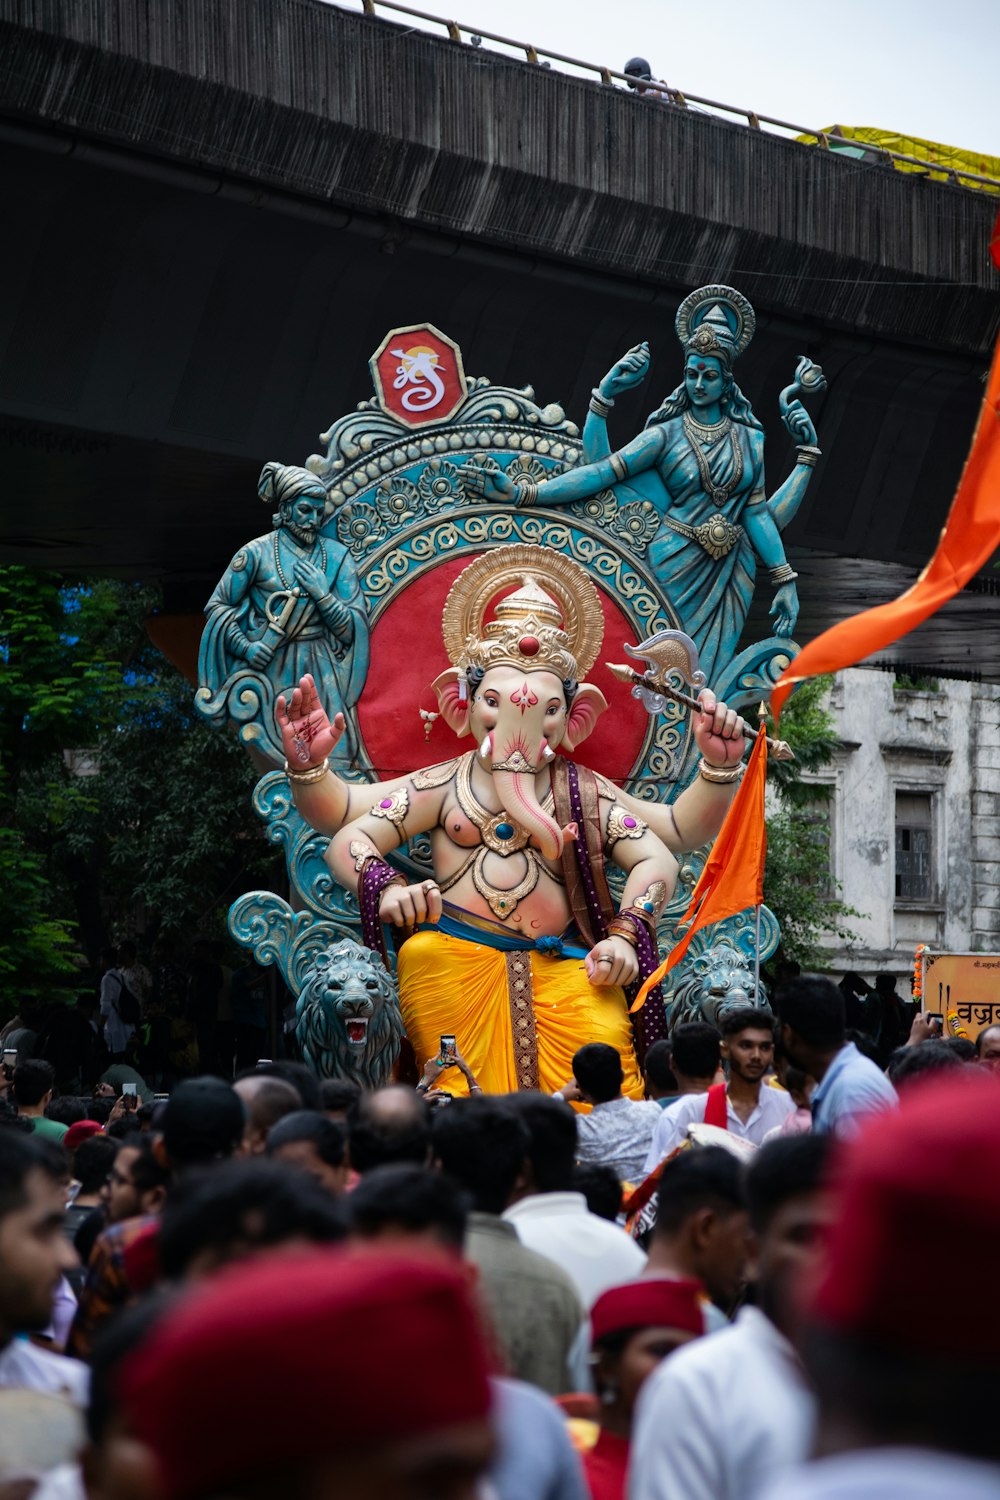 a large statue of a hindu god in a crowd of people